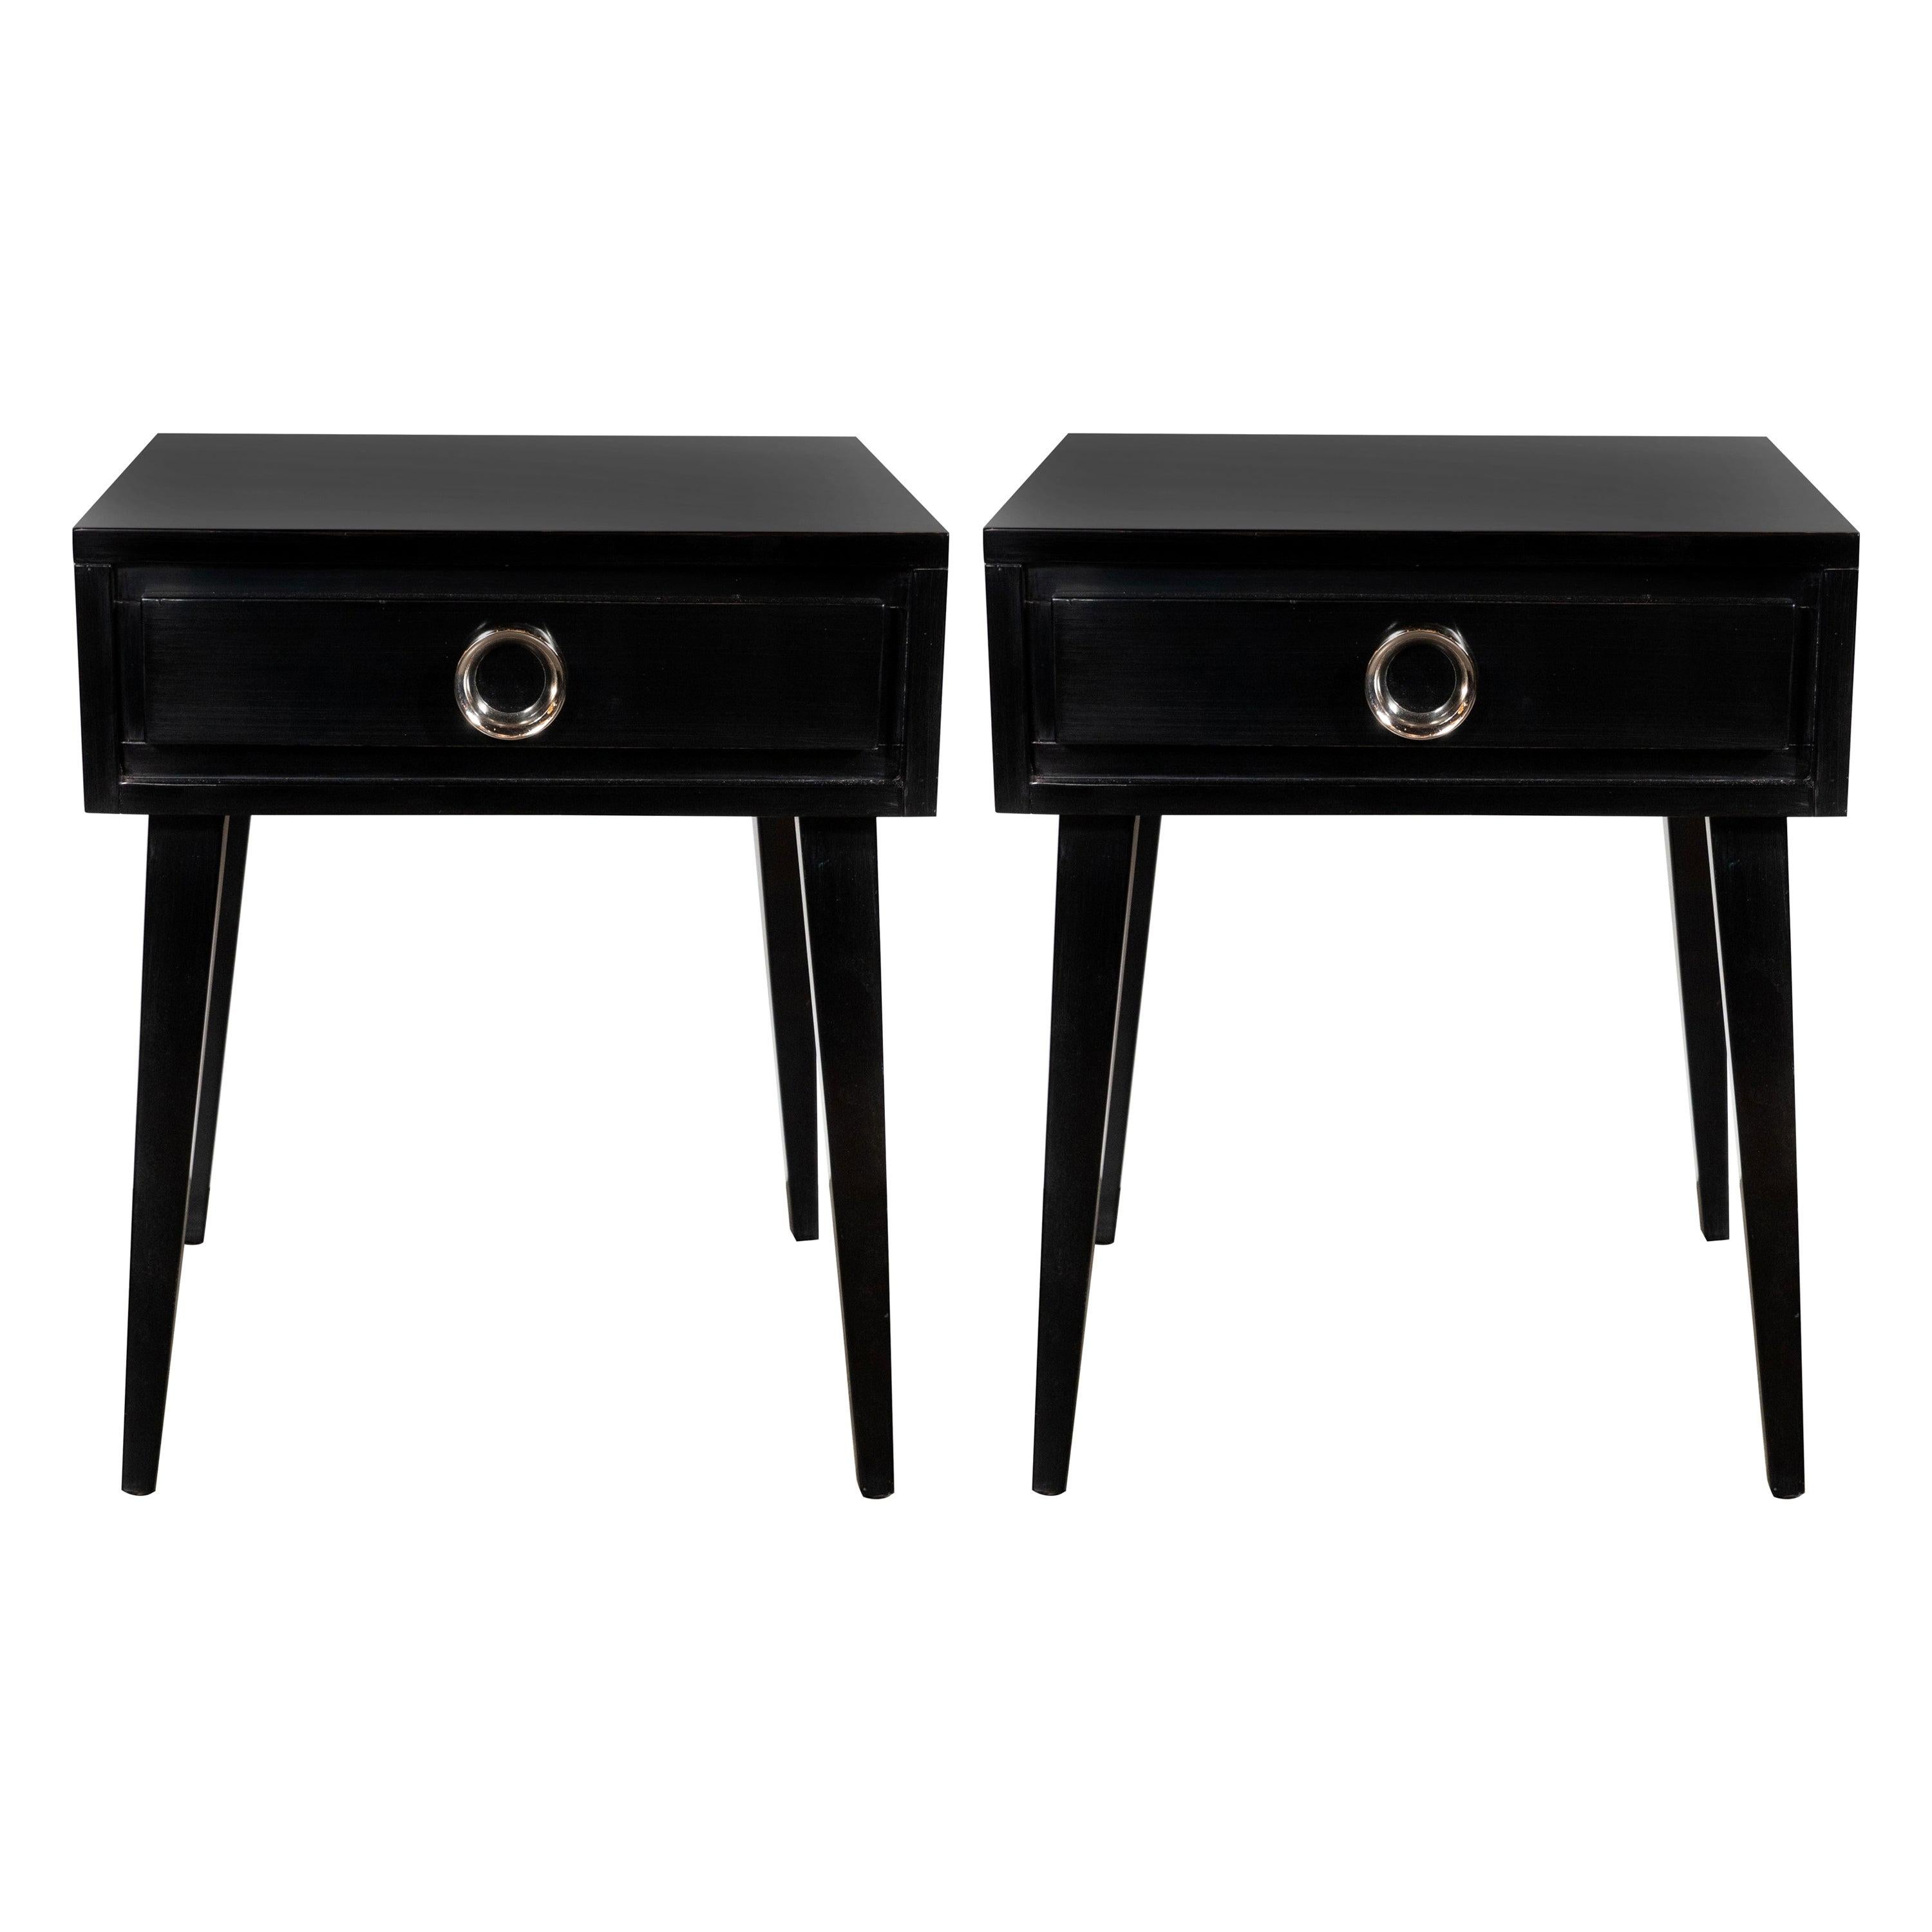 Mid-Century Modern End Tables/ Nightstands with Circular Nickeled Pulls